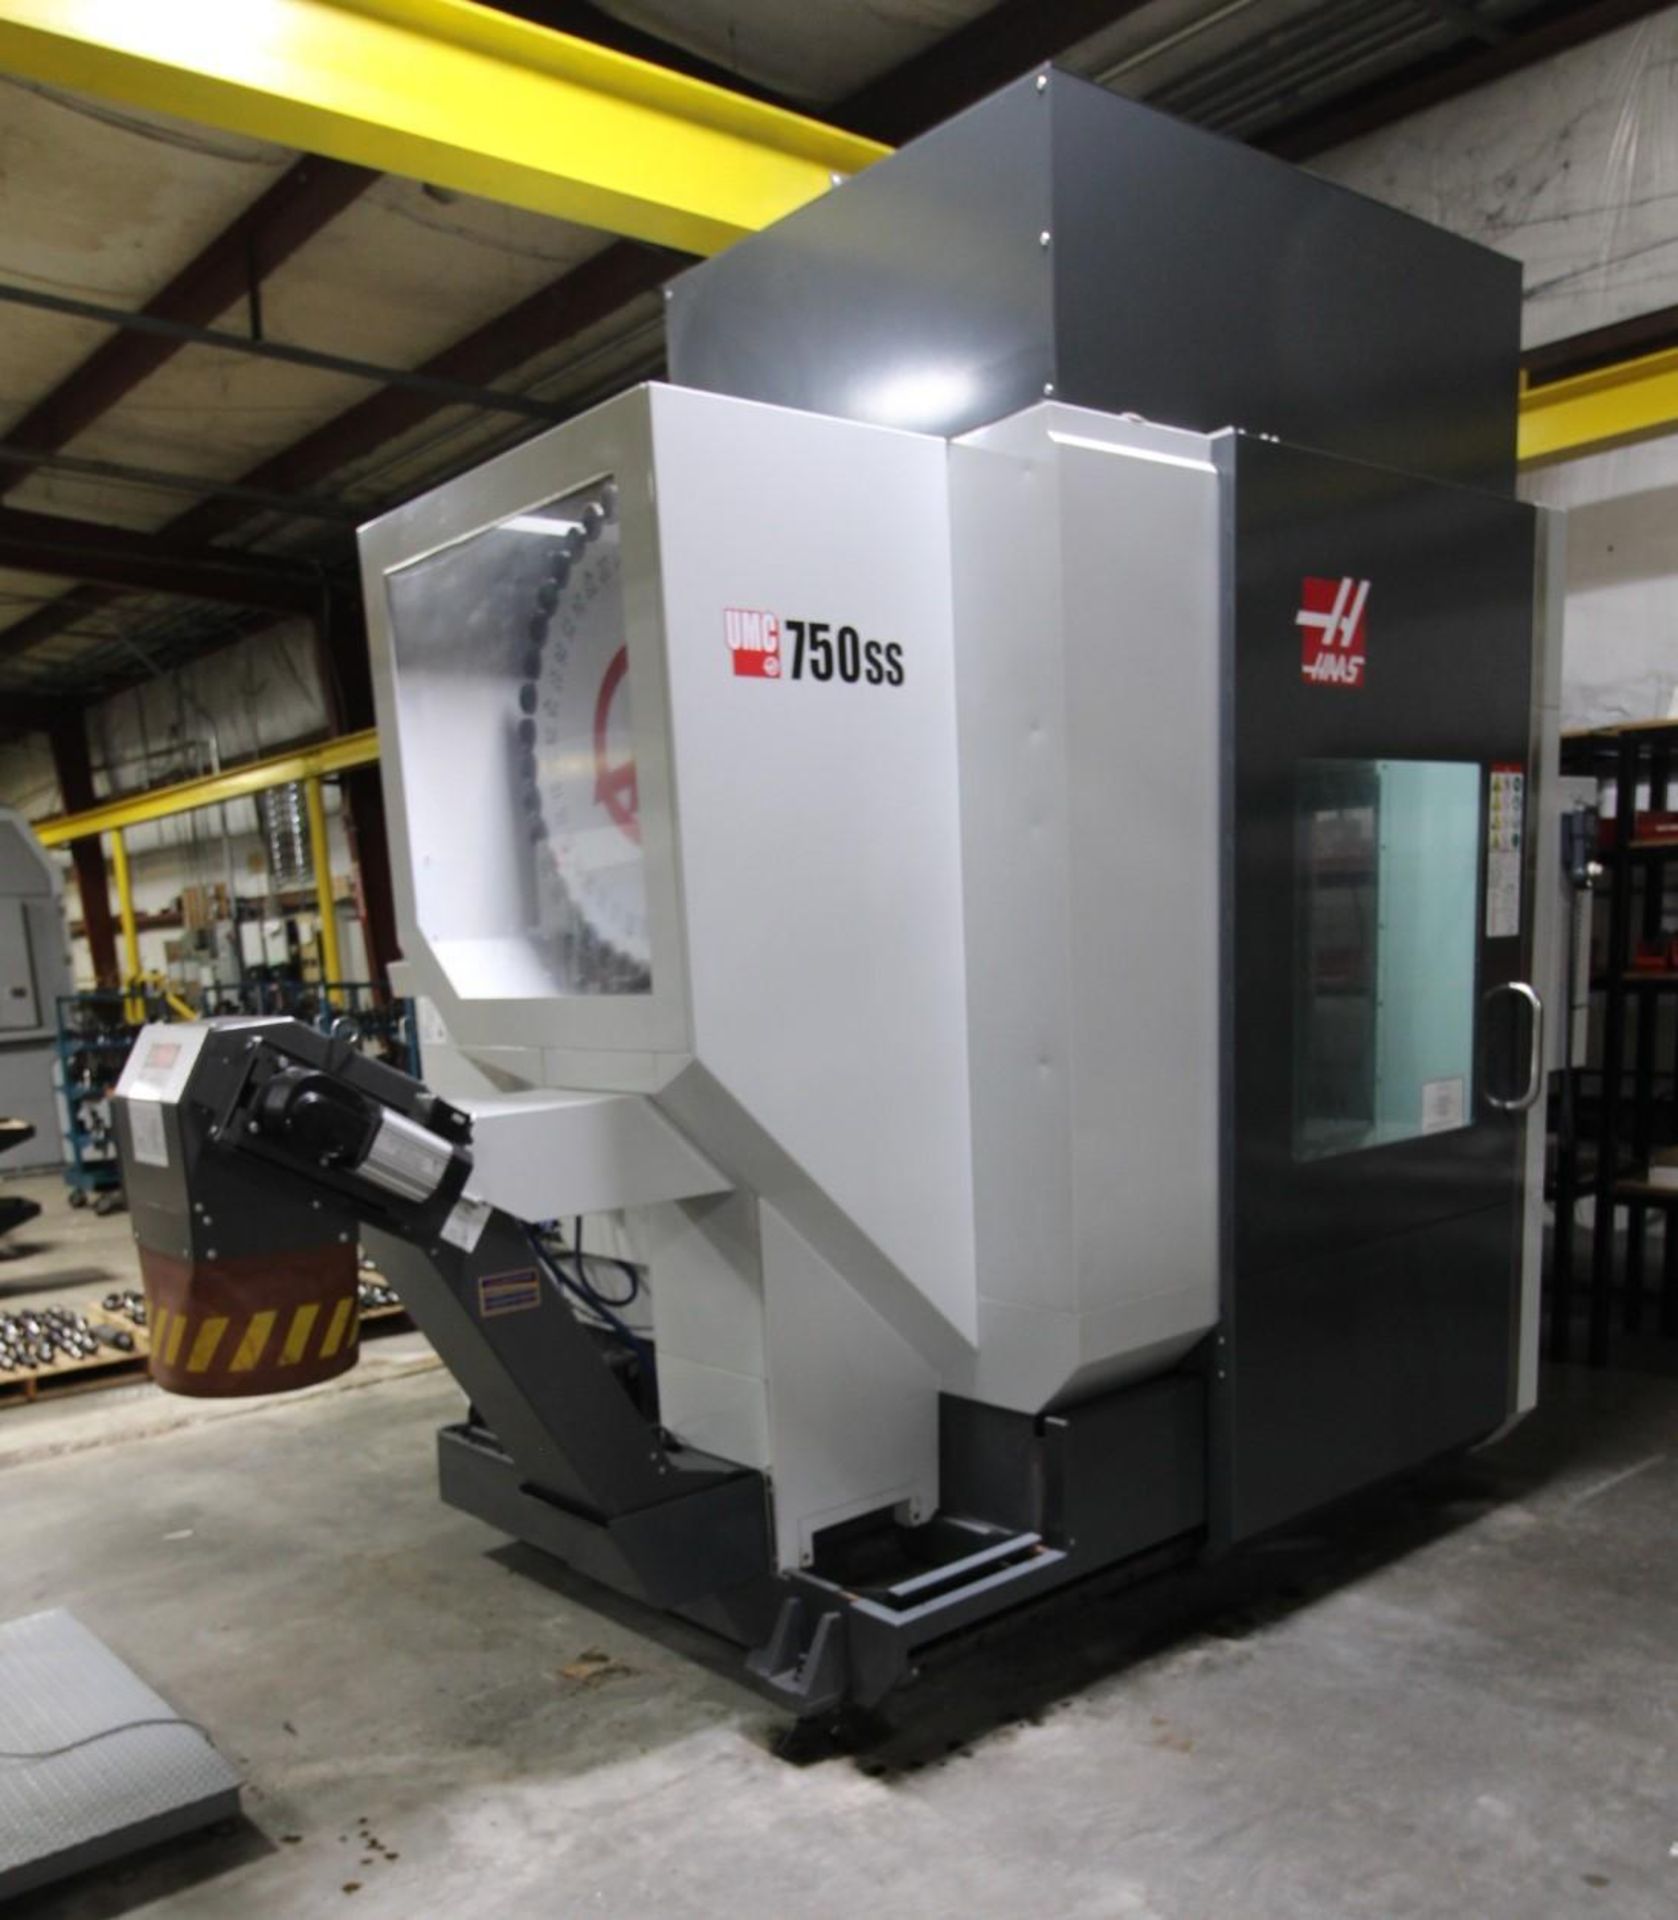 5-AXIS UNIVERSAL MACHINING CENTER, HAAS MDL. UMC750SS, new 2018, Haas CNC control, 30” X, 20” Y, 20” - Image 13 of 17